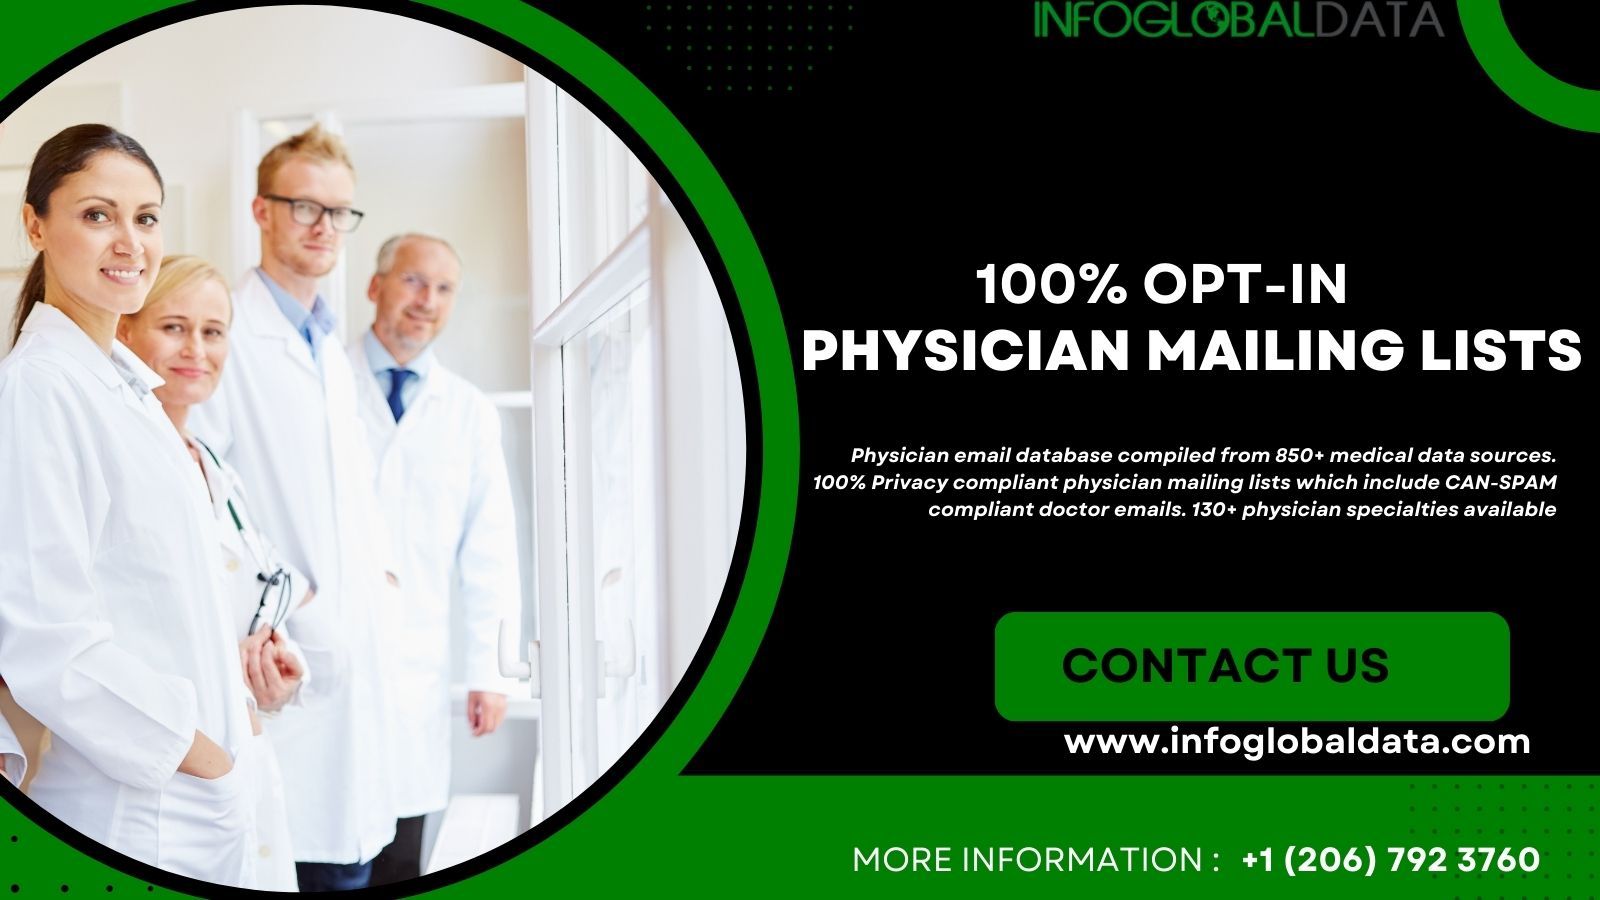 Get Verified 940K+ Opt-in Physicians Email Lists In US From Infoglobaldata